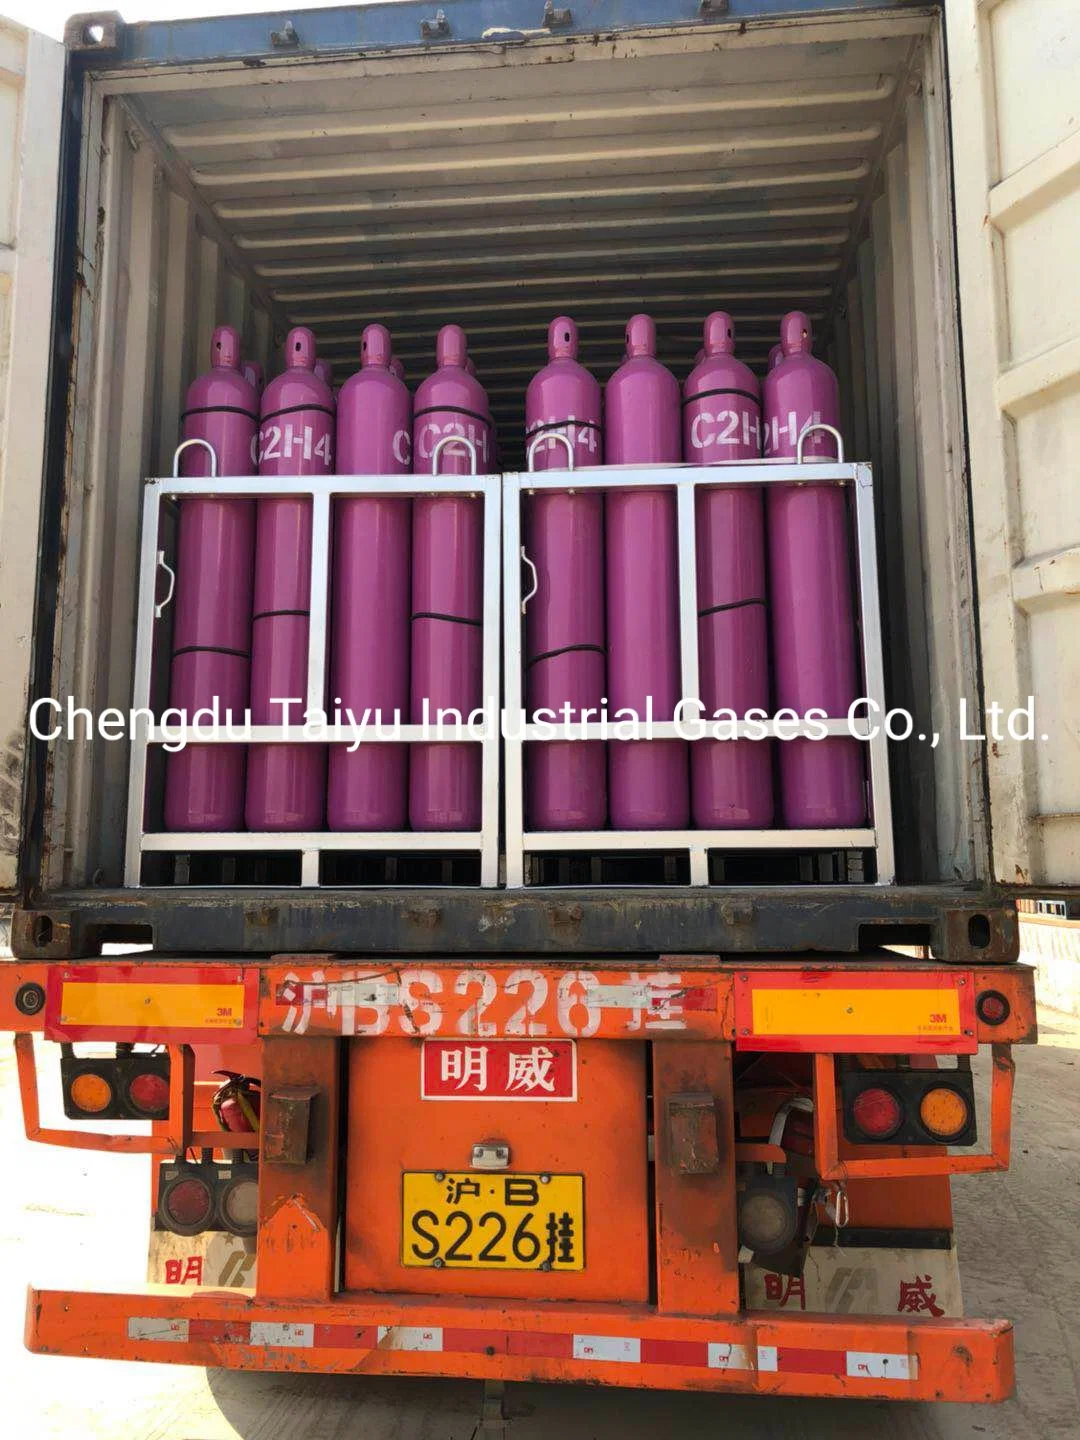 High Purity Industrial Use 99.95% Purity Ripening Ethylene Gas C2h4 with Factory Price